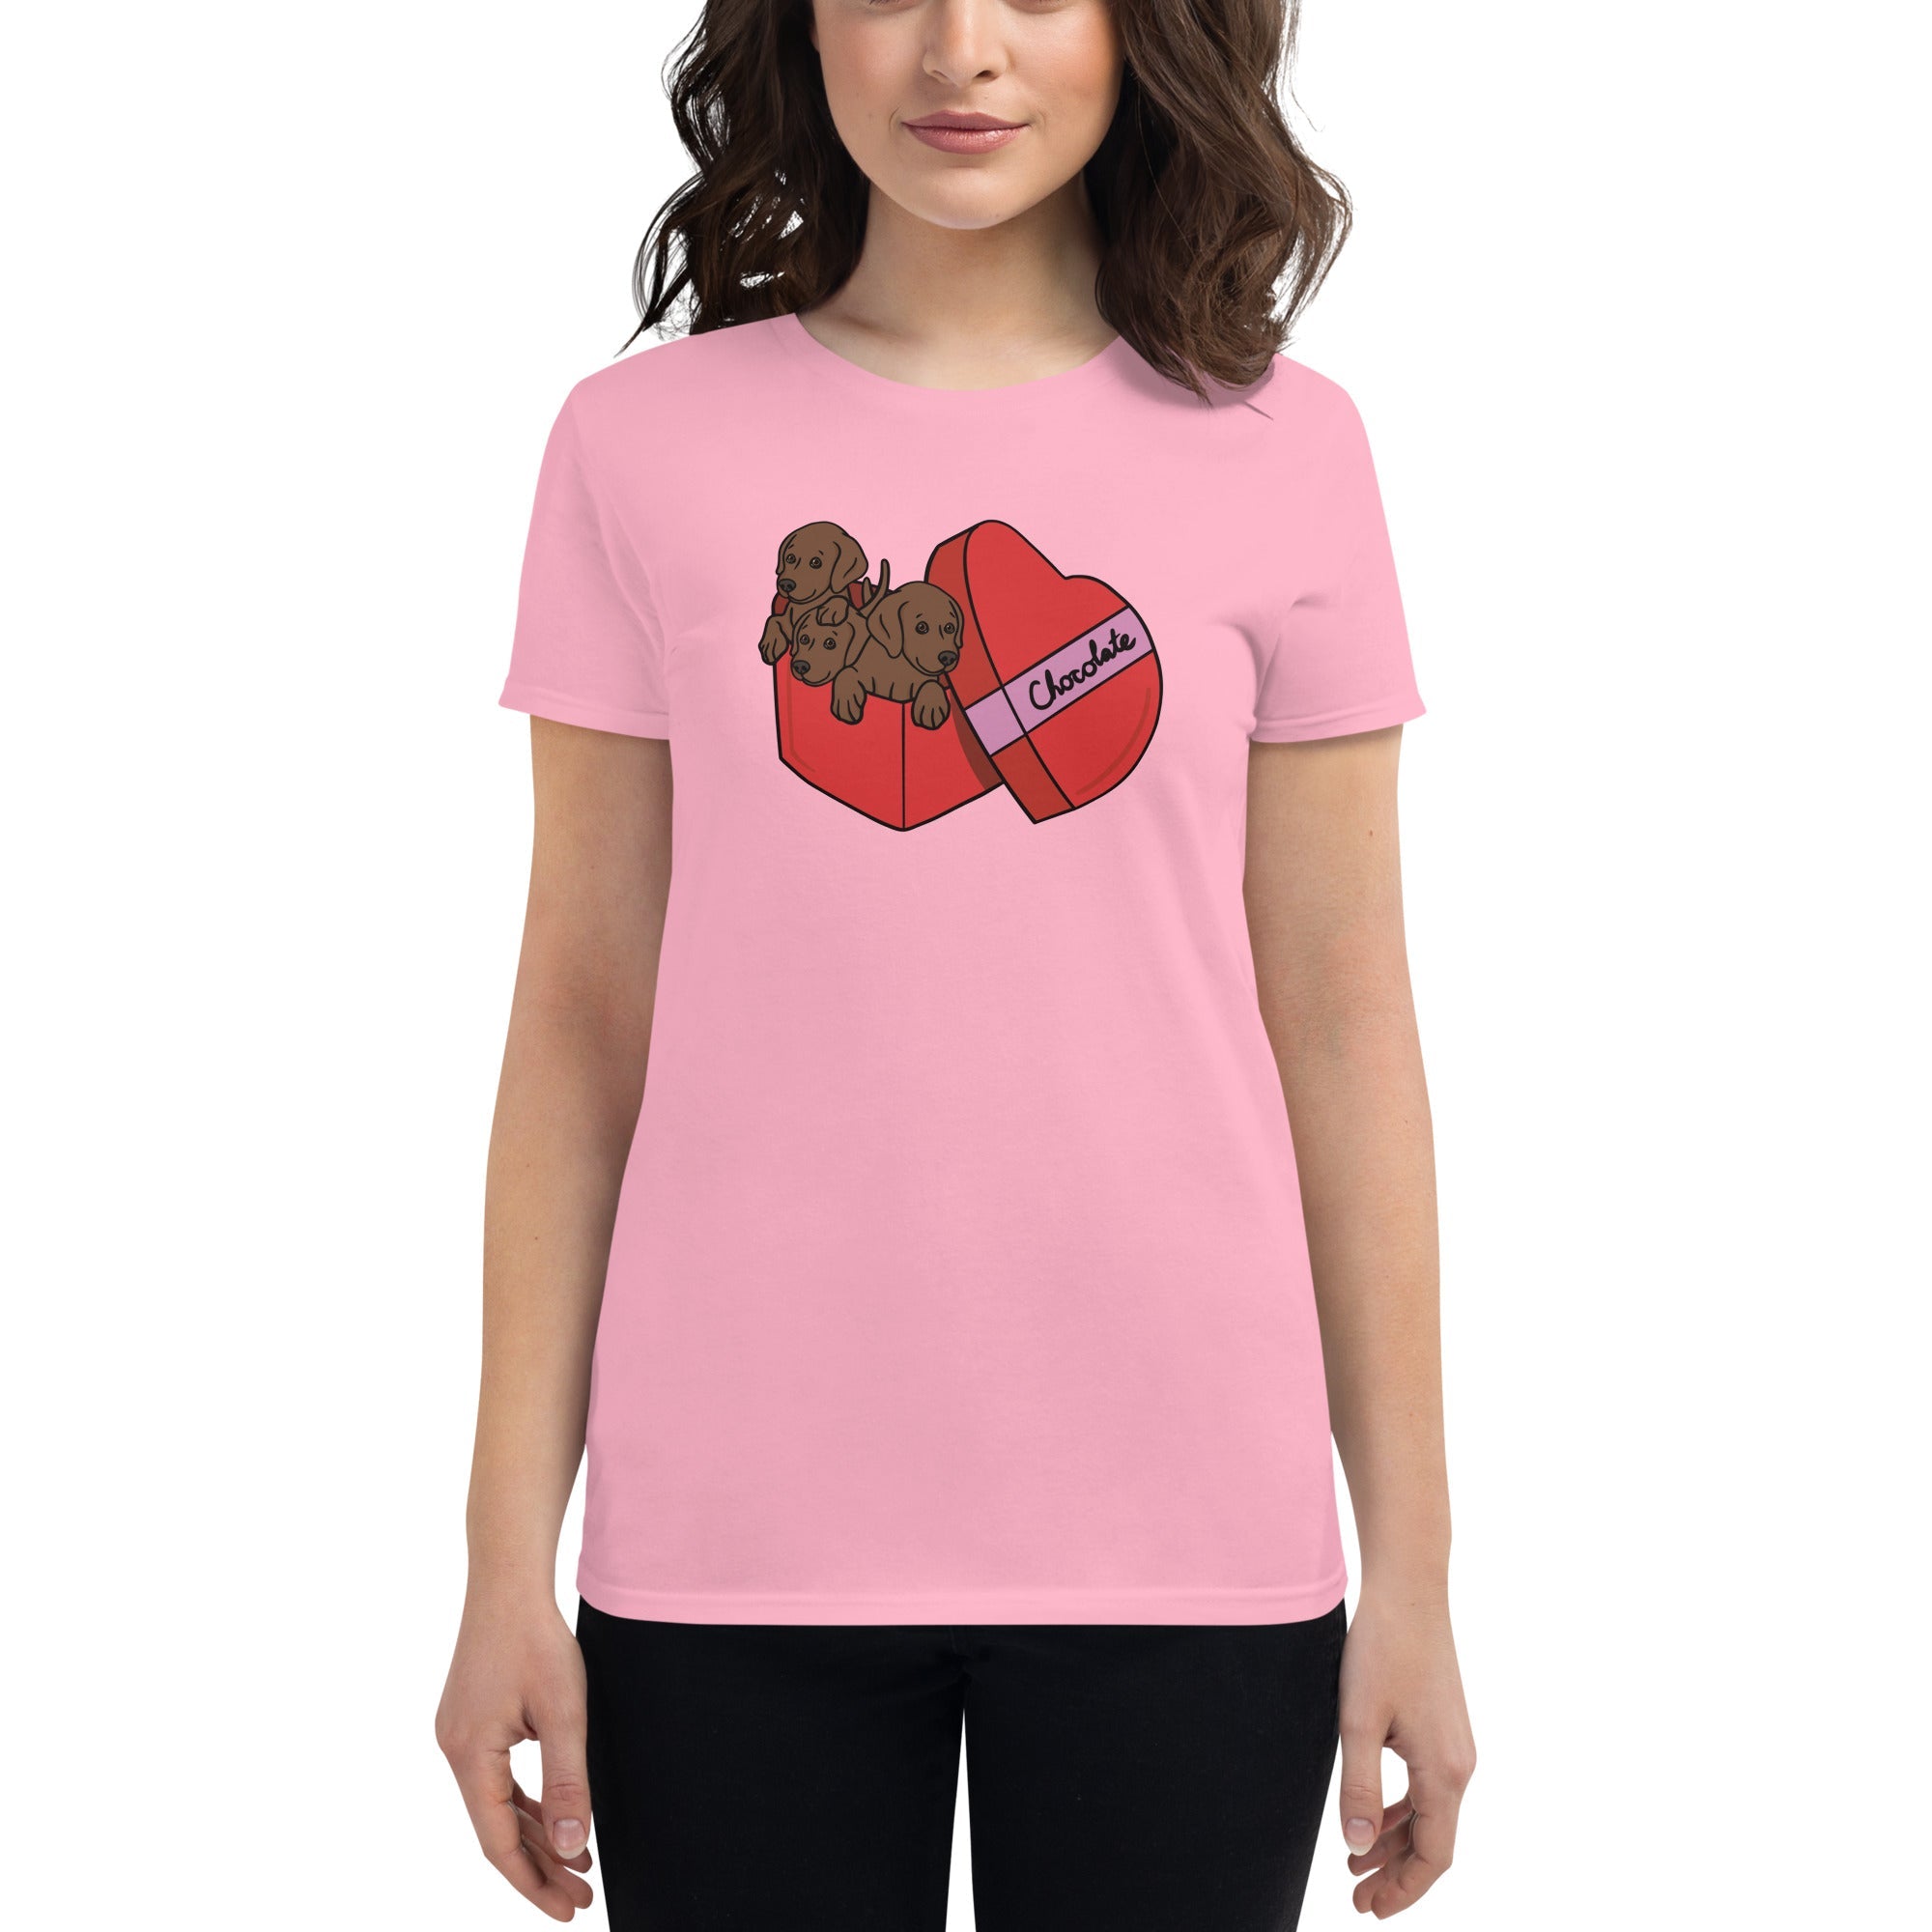 Box of Chocolates Women's Fit T-Shirt - TAILWAGS UNLIMITED